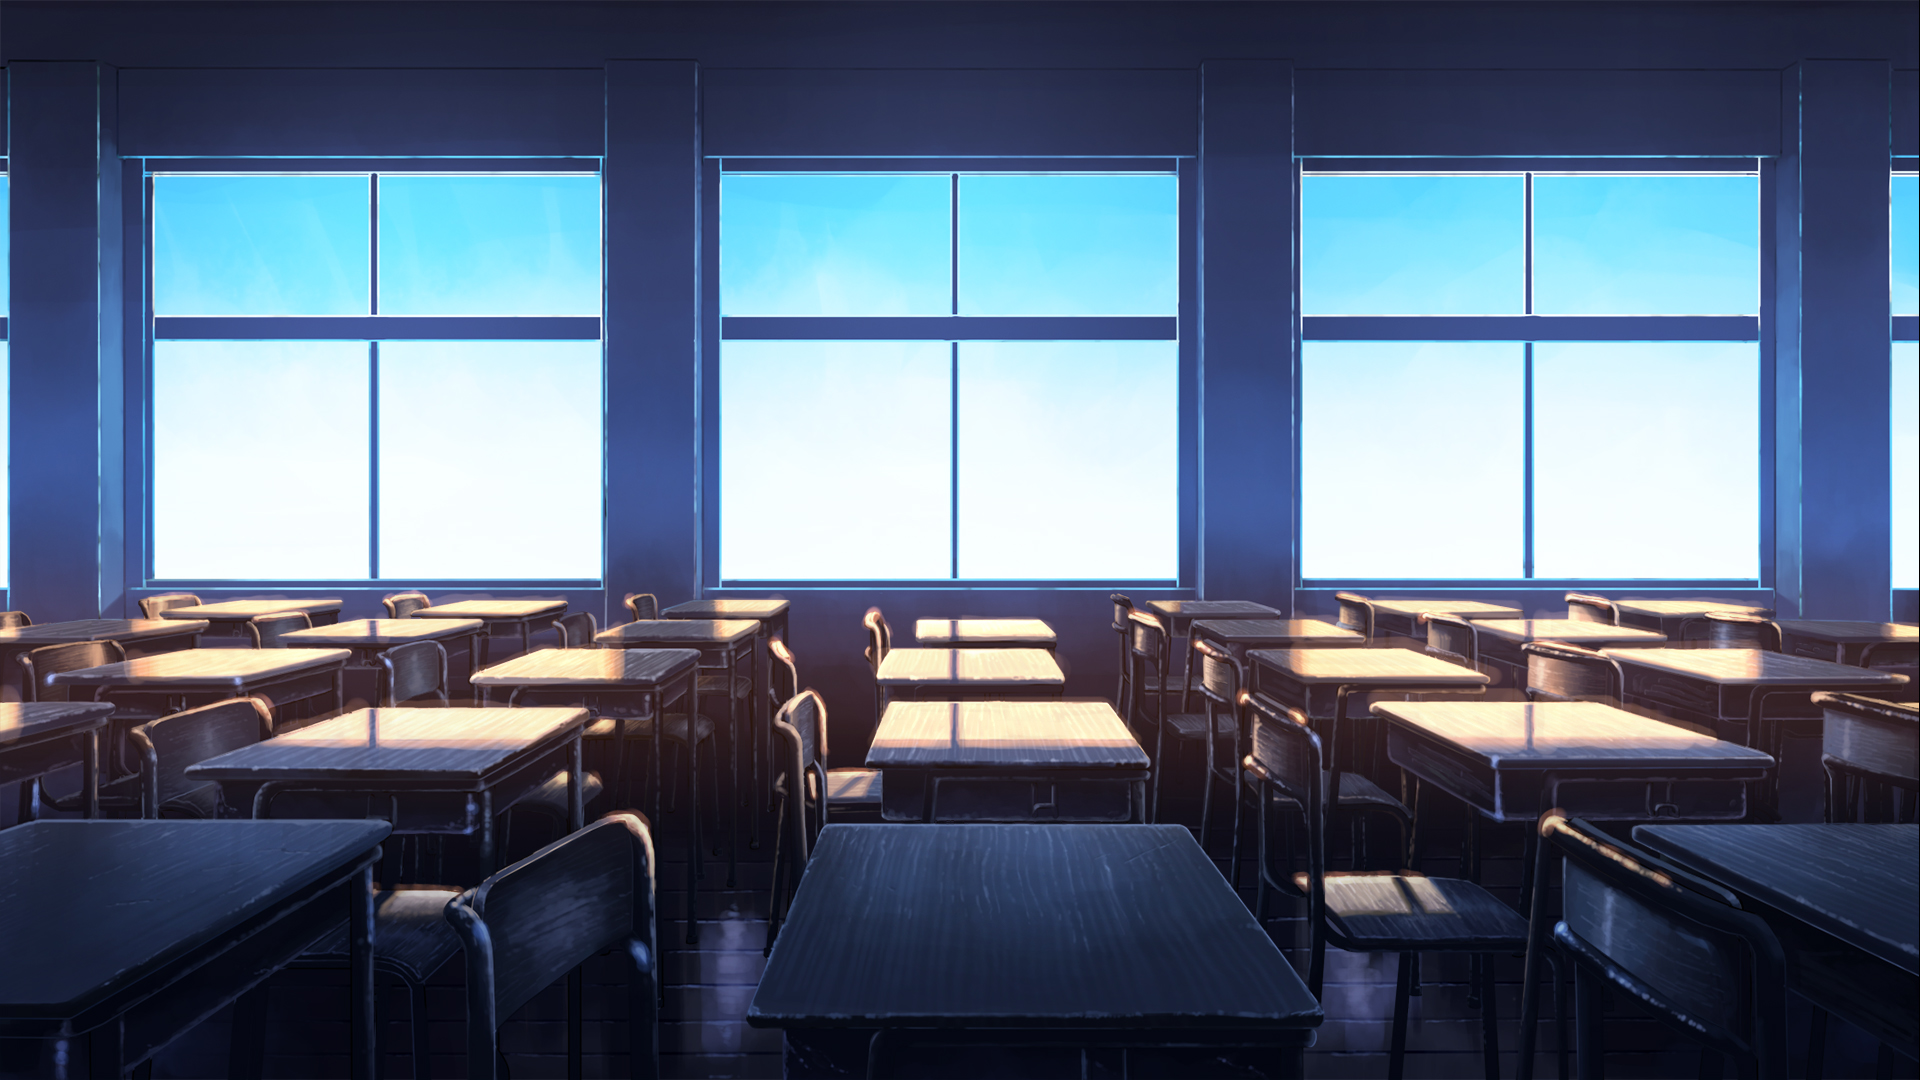 Anime Classroom HD Wallpaper by Aratascape